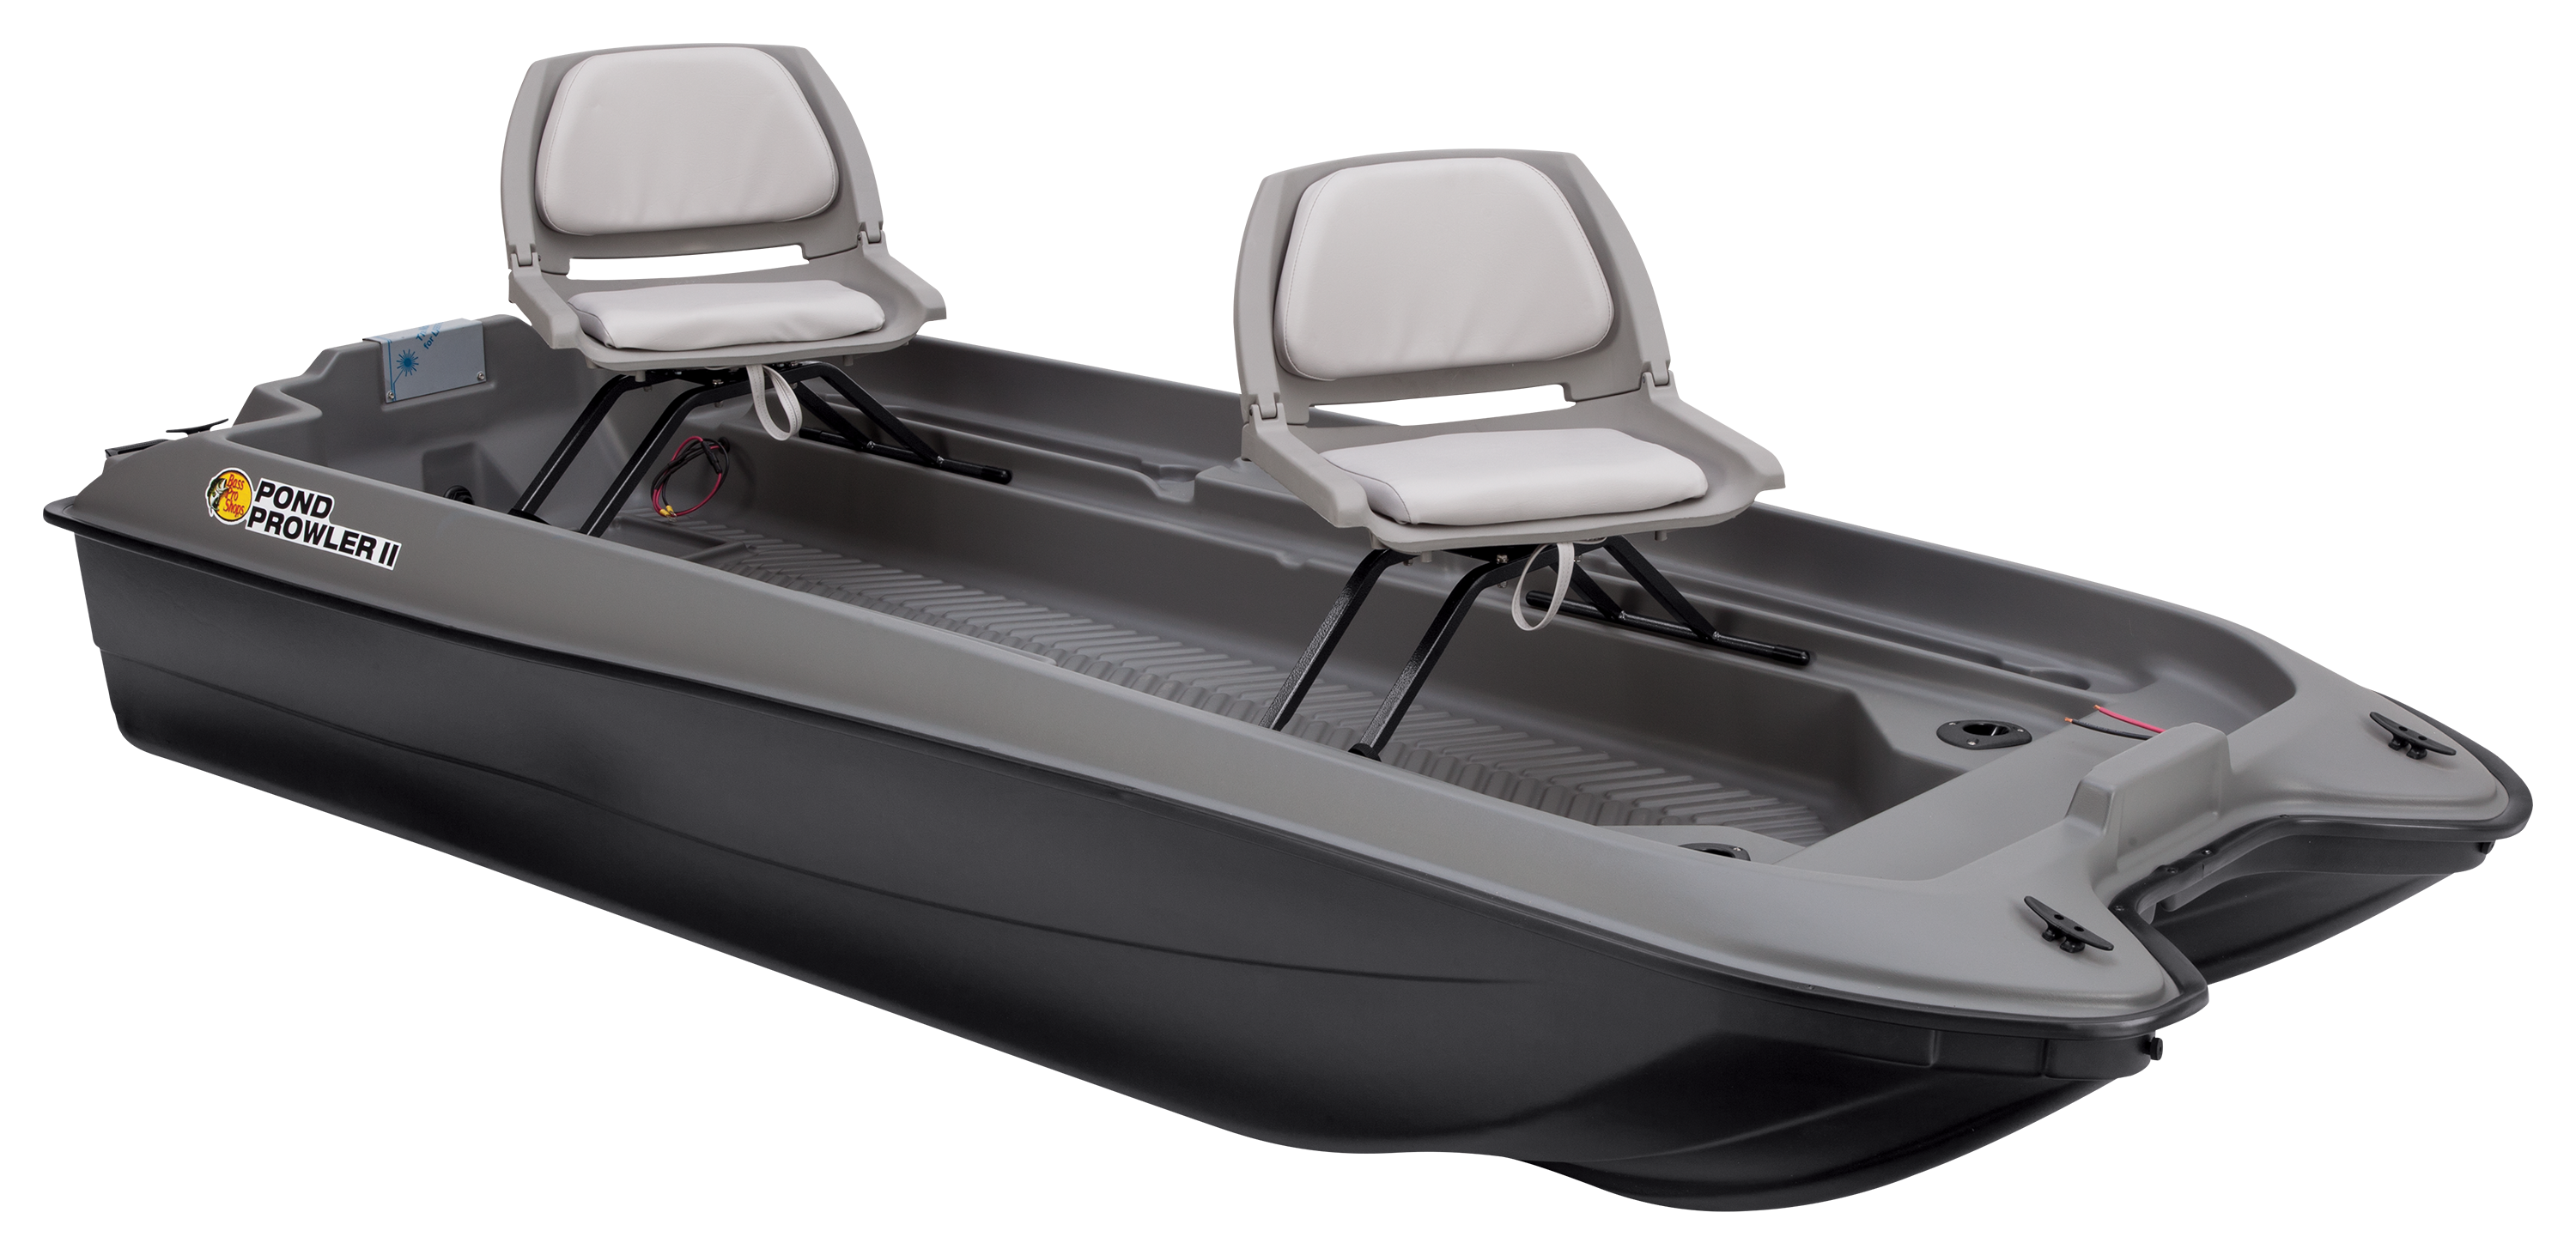 Bass pro pond prowler 2  Pelican boats, Fishing boats, Small